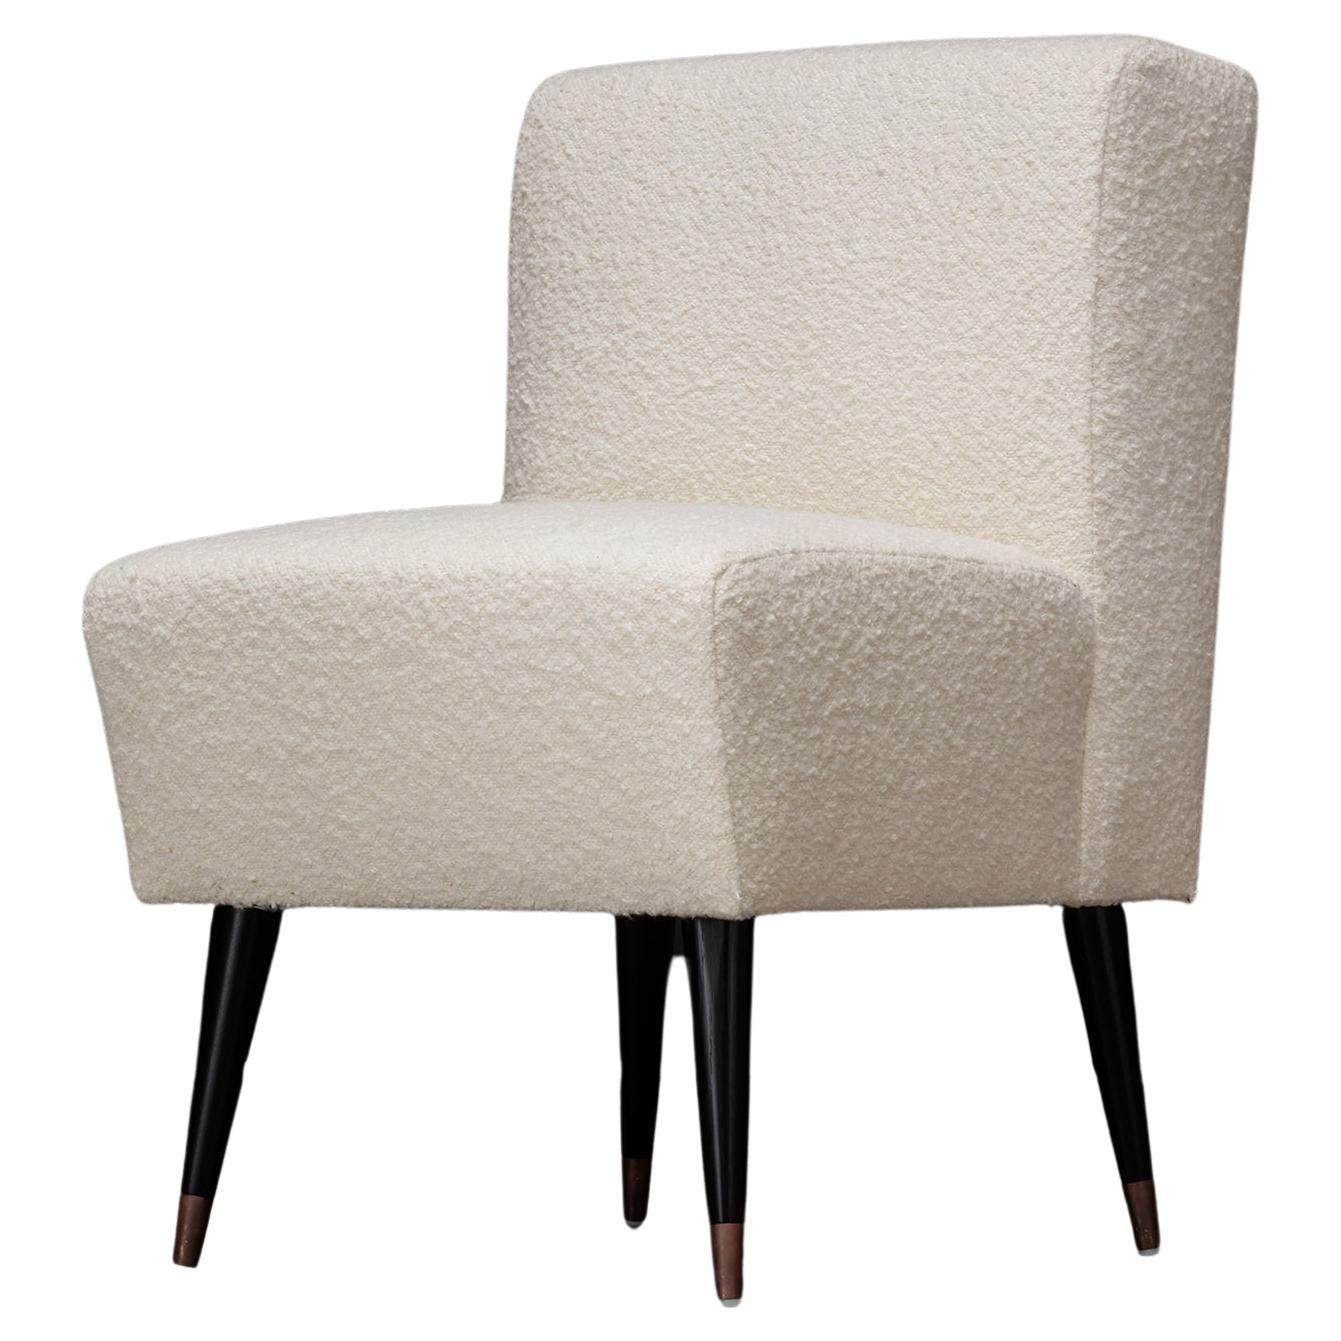 JOLIE DINING CHAIR - Modern Sculpted Design in Creme Boucle For Sale